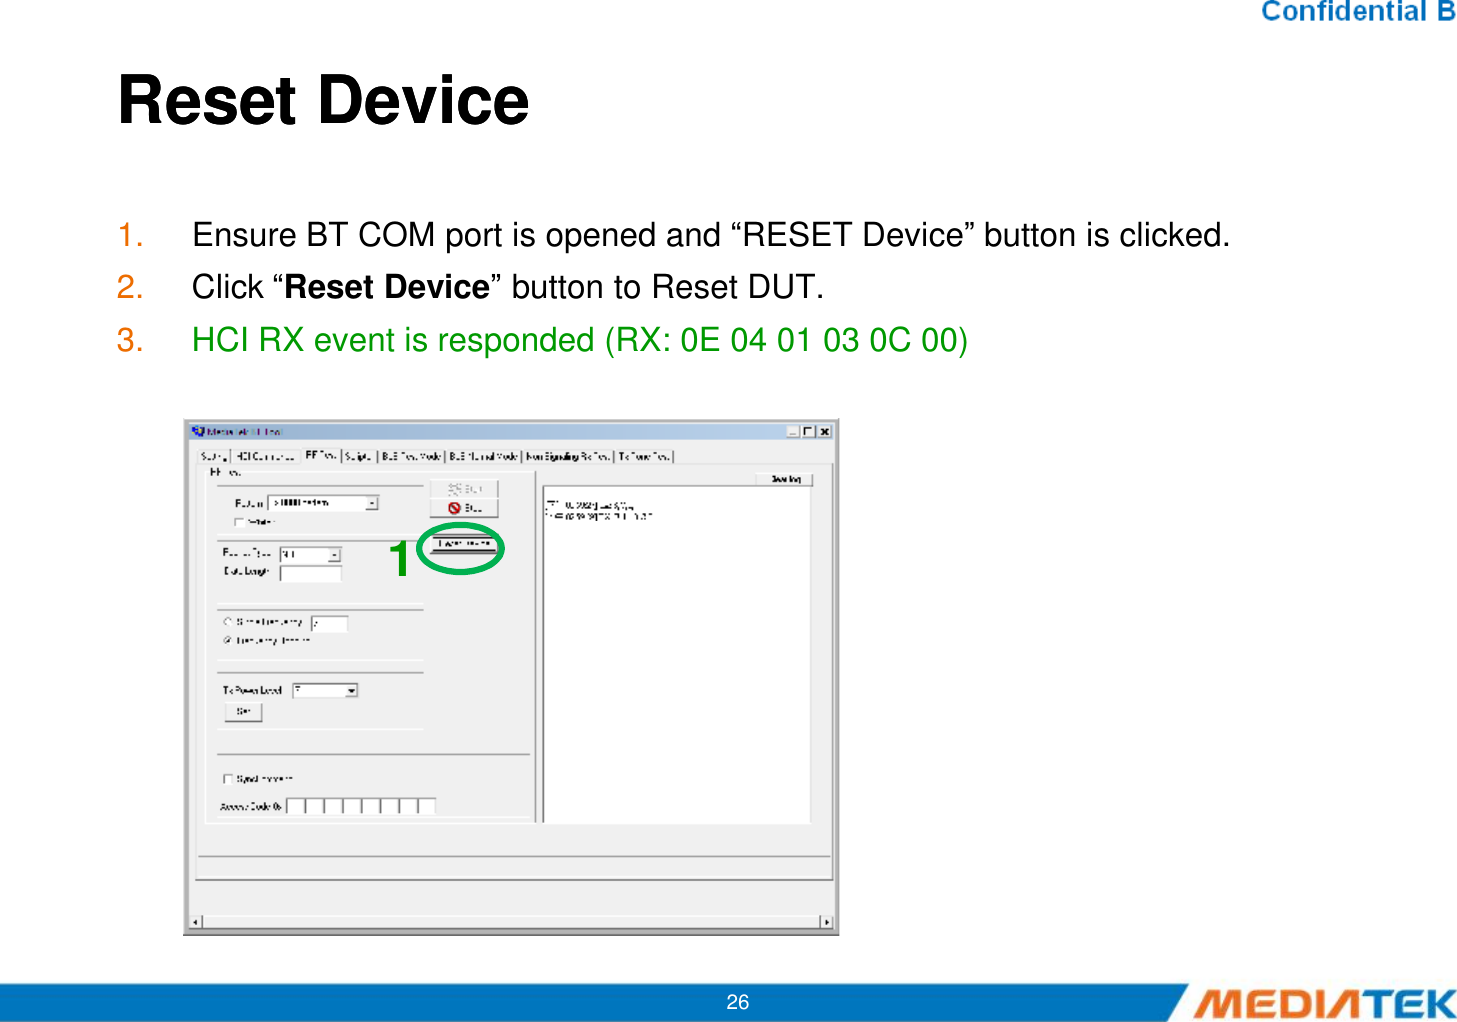 Reset DeviceReset Device1. Ensure BT COM port is opened and “RESET Device” button is clicked.2. Click “Reset Device” button to Reset DUT.3. HCI RX event is responded (RX: 0E 04 01 03 0C 00)261